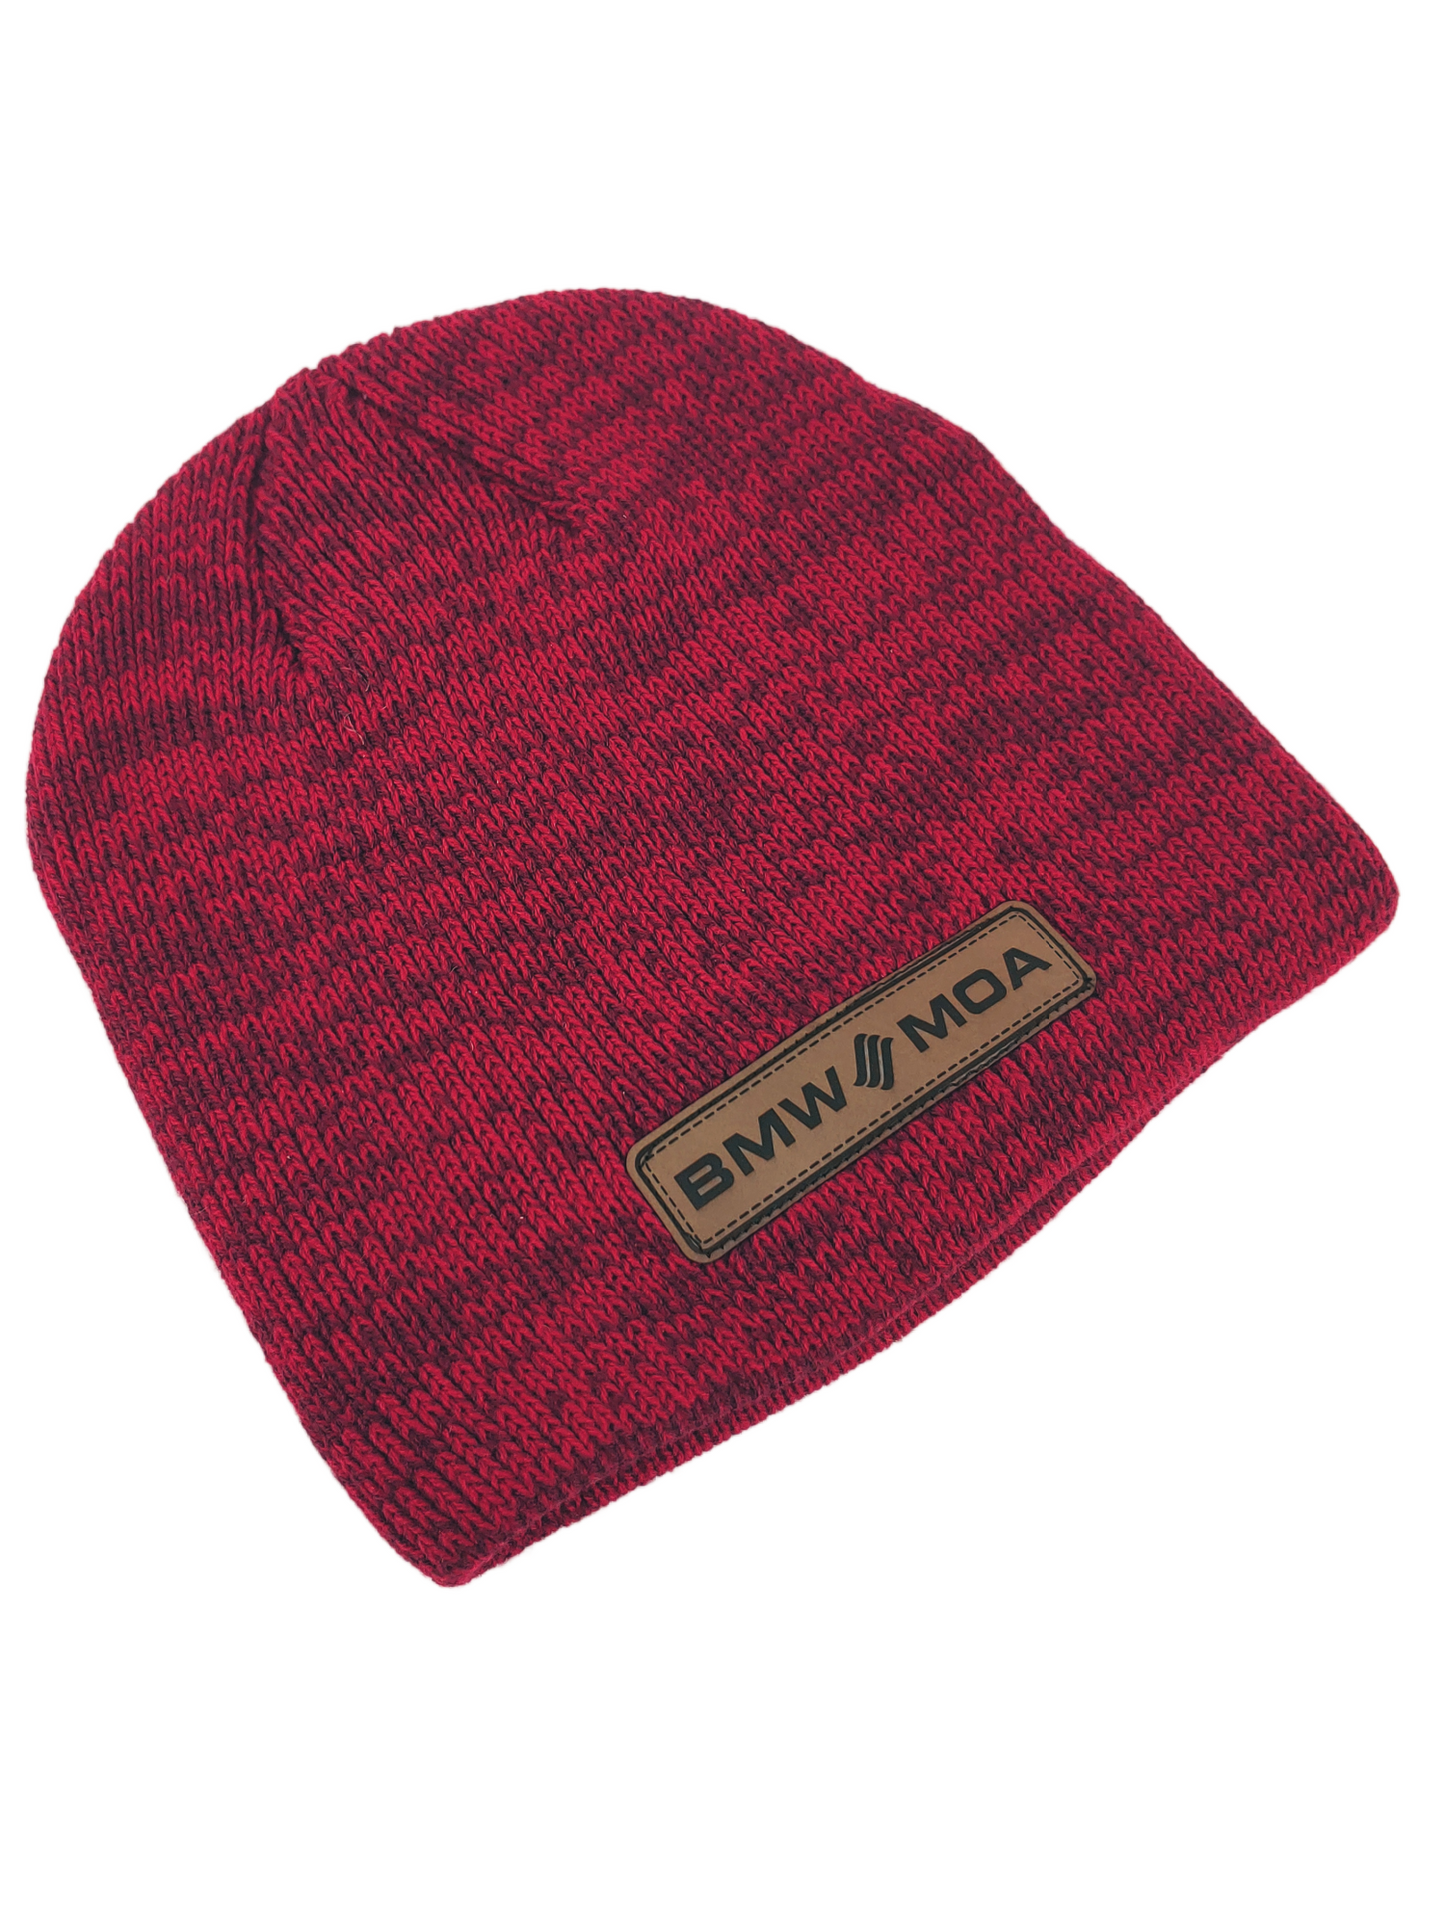 50th Anniversary - Limited Edition Beanies